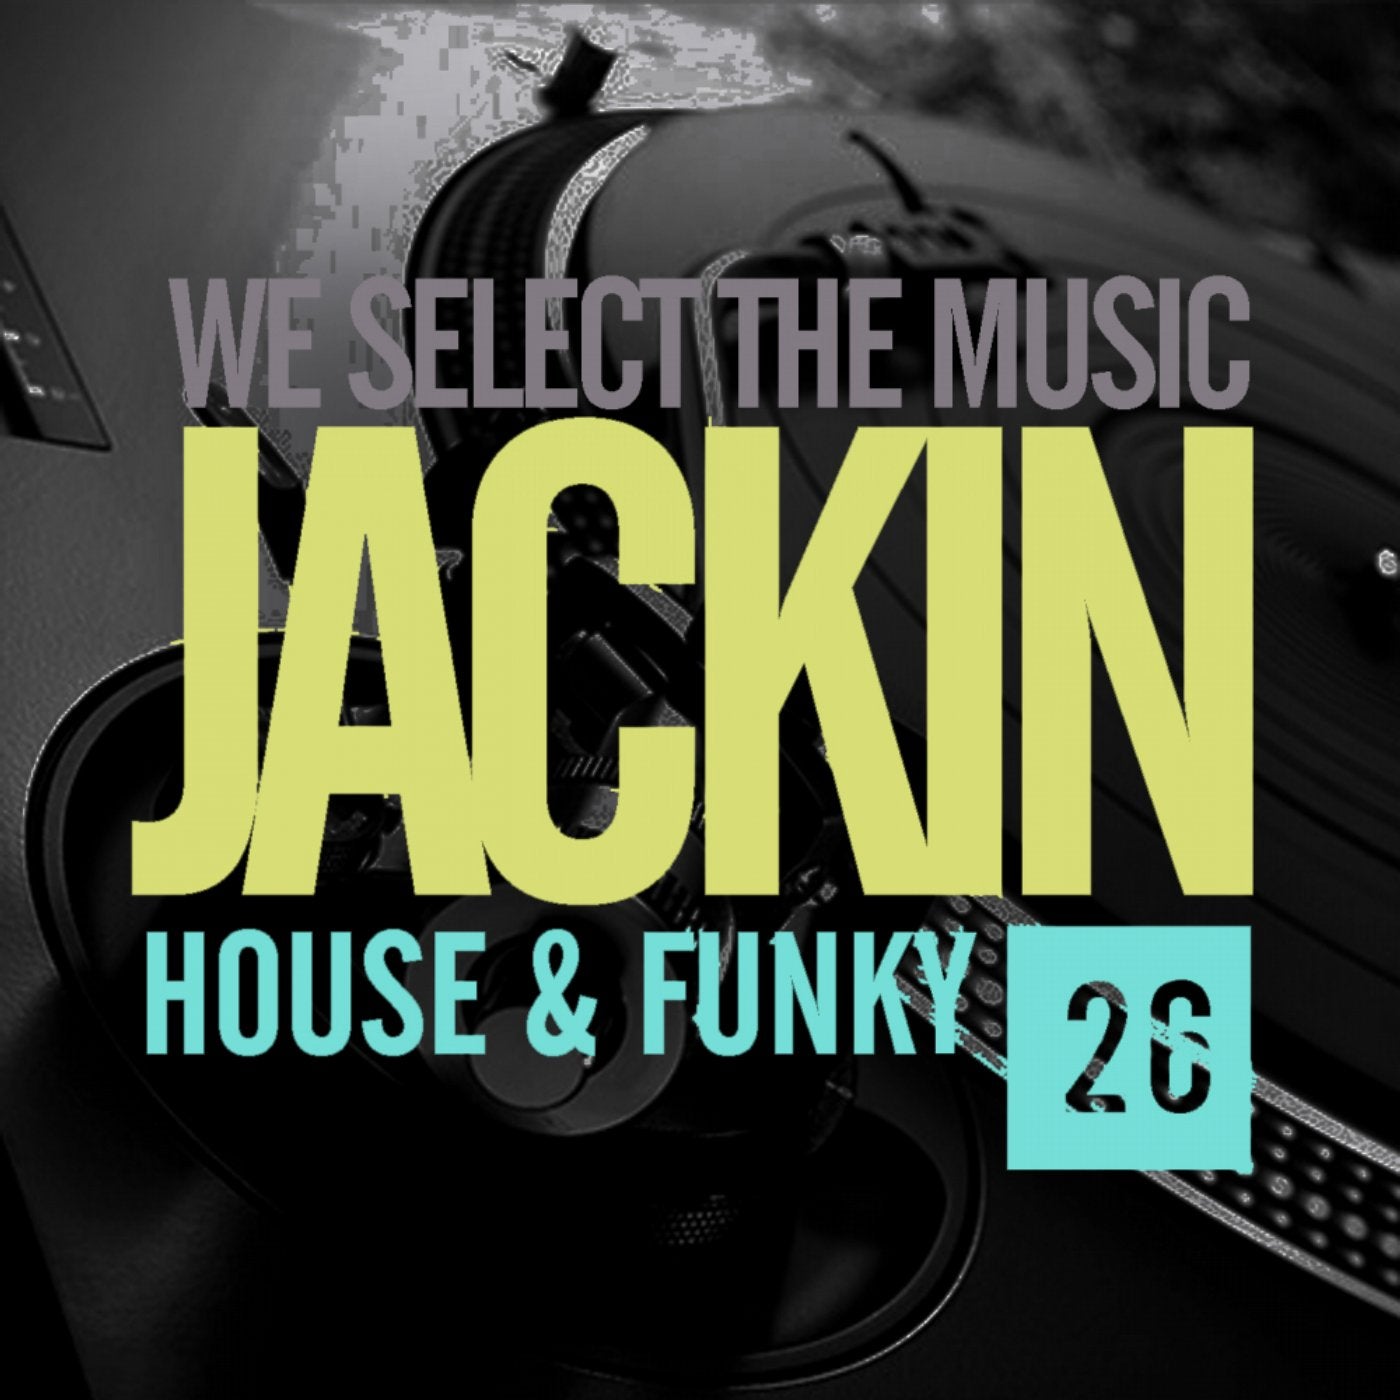 We Select The Music, Vol.26: Jackin House & Funky